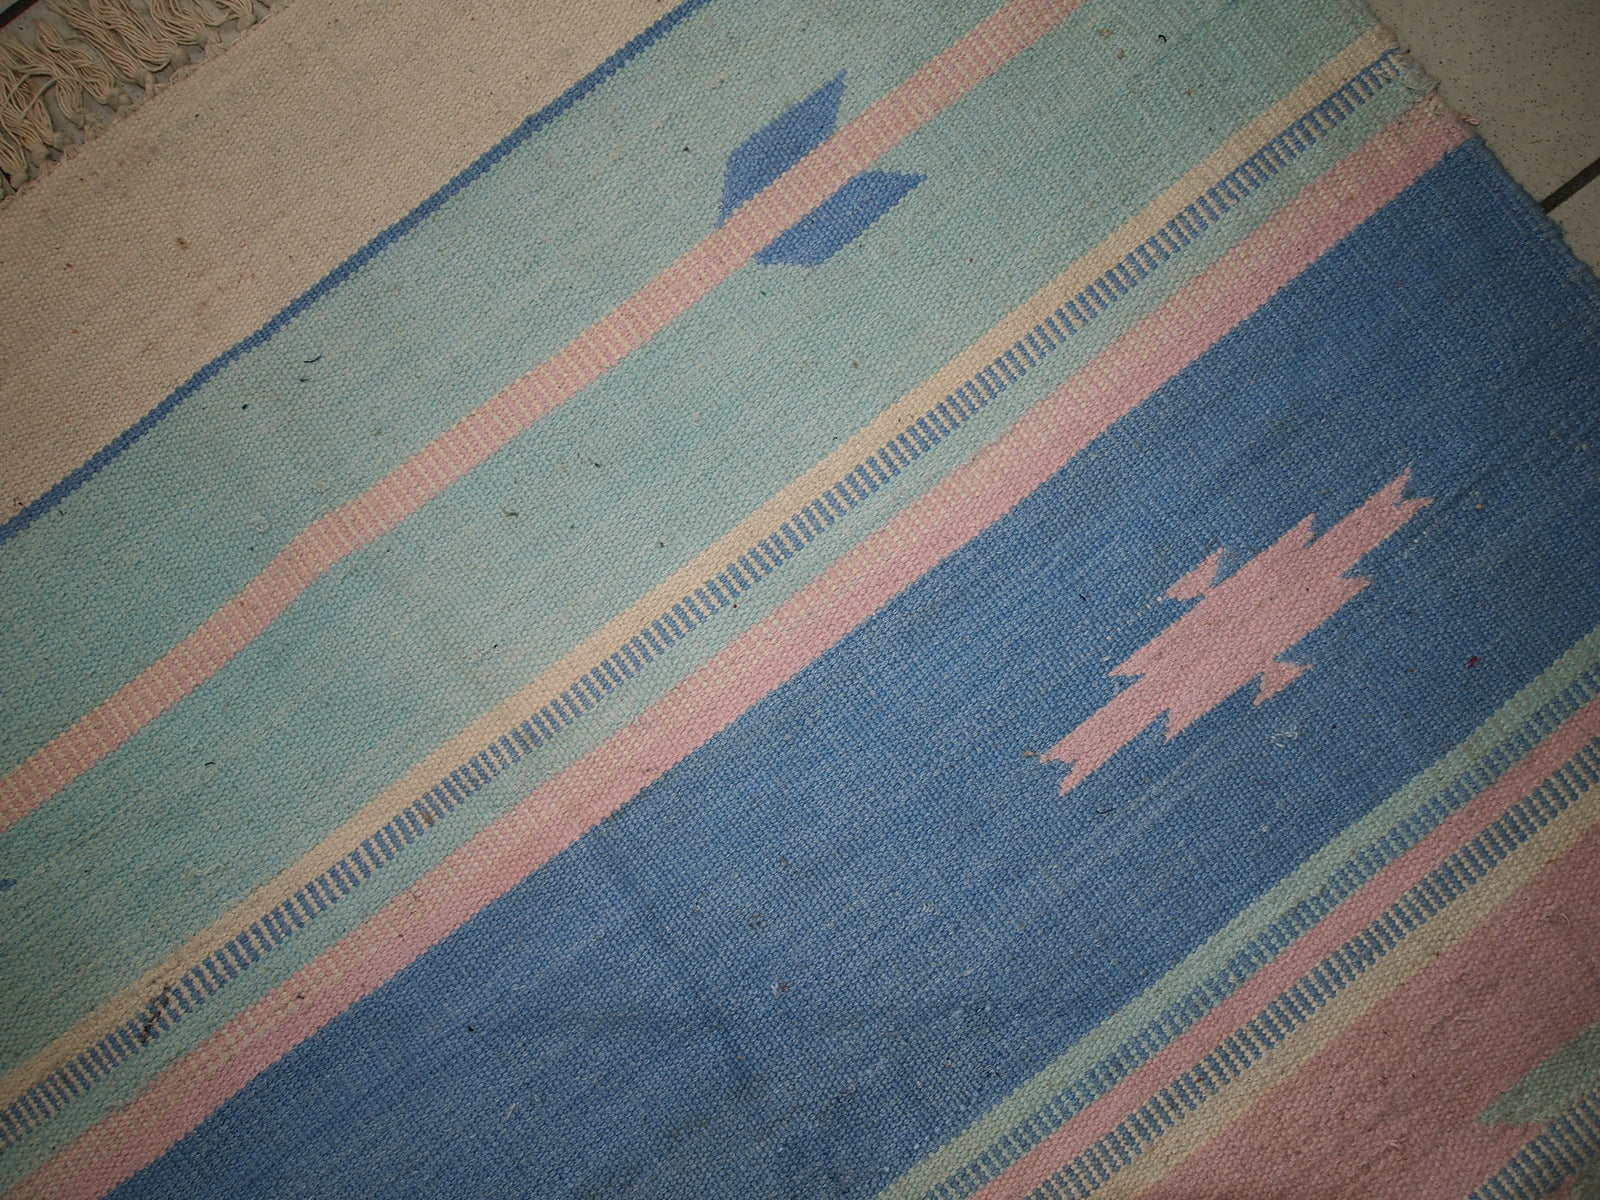 Detail shot of the kilim's pastel blue and sea blue stripes.